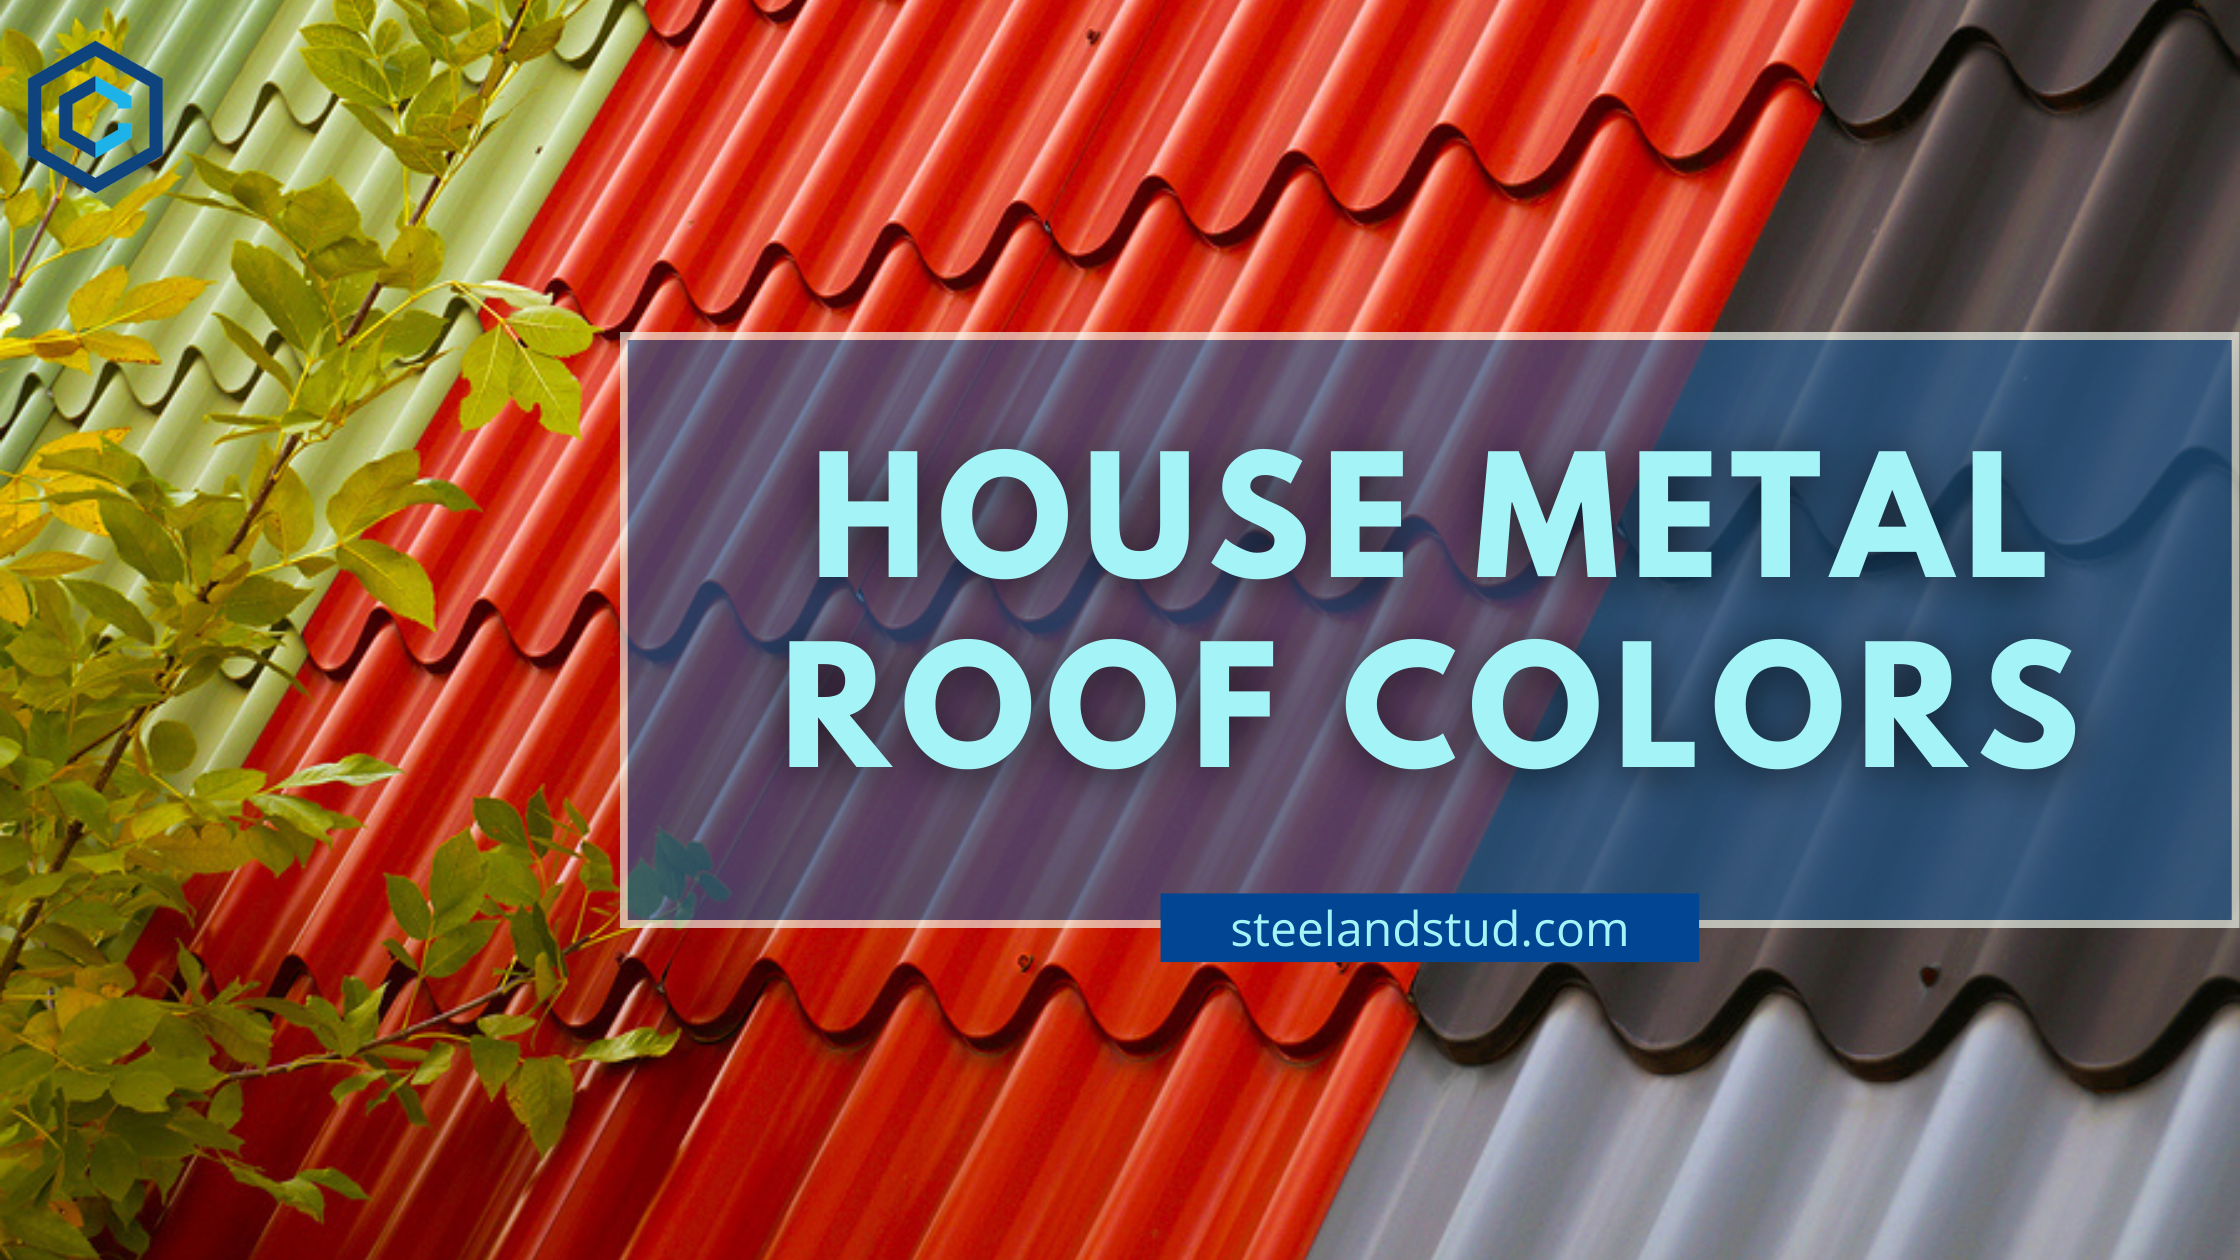 House Metal Roof Colors